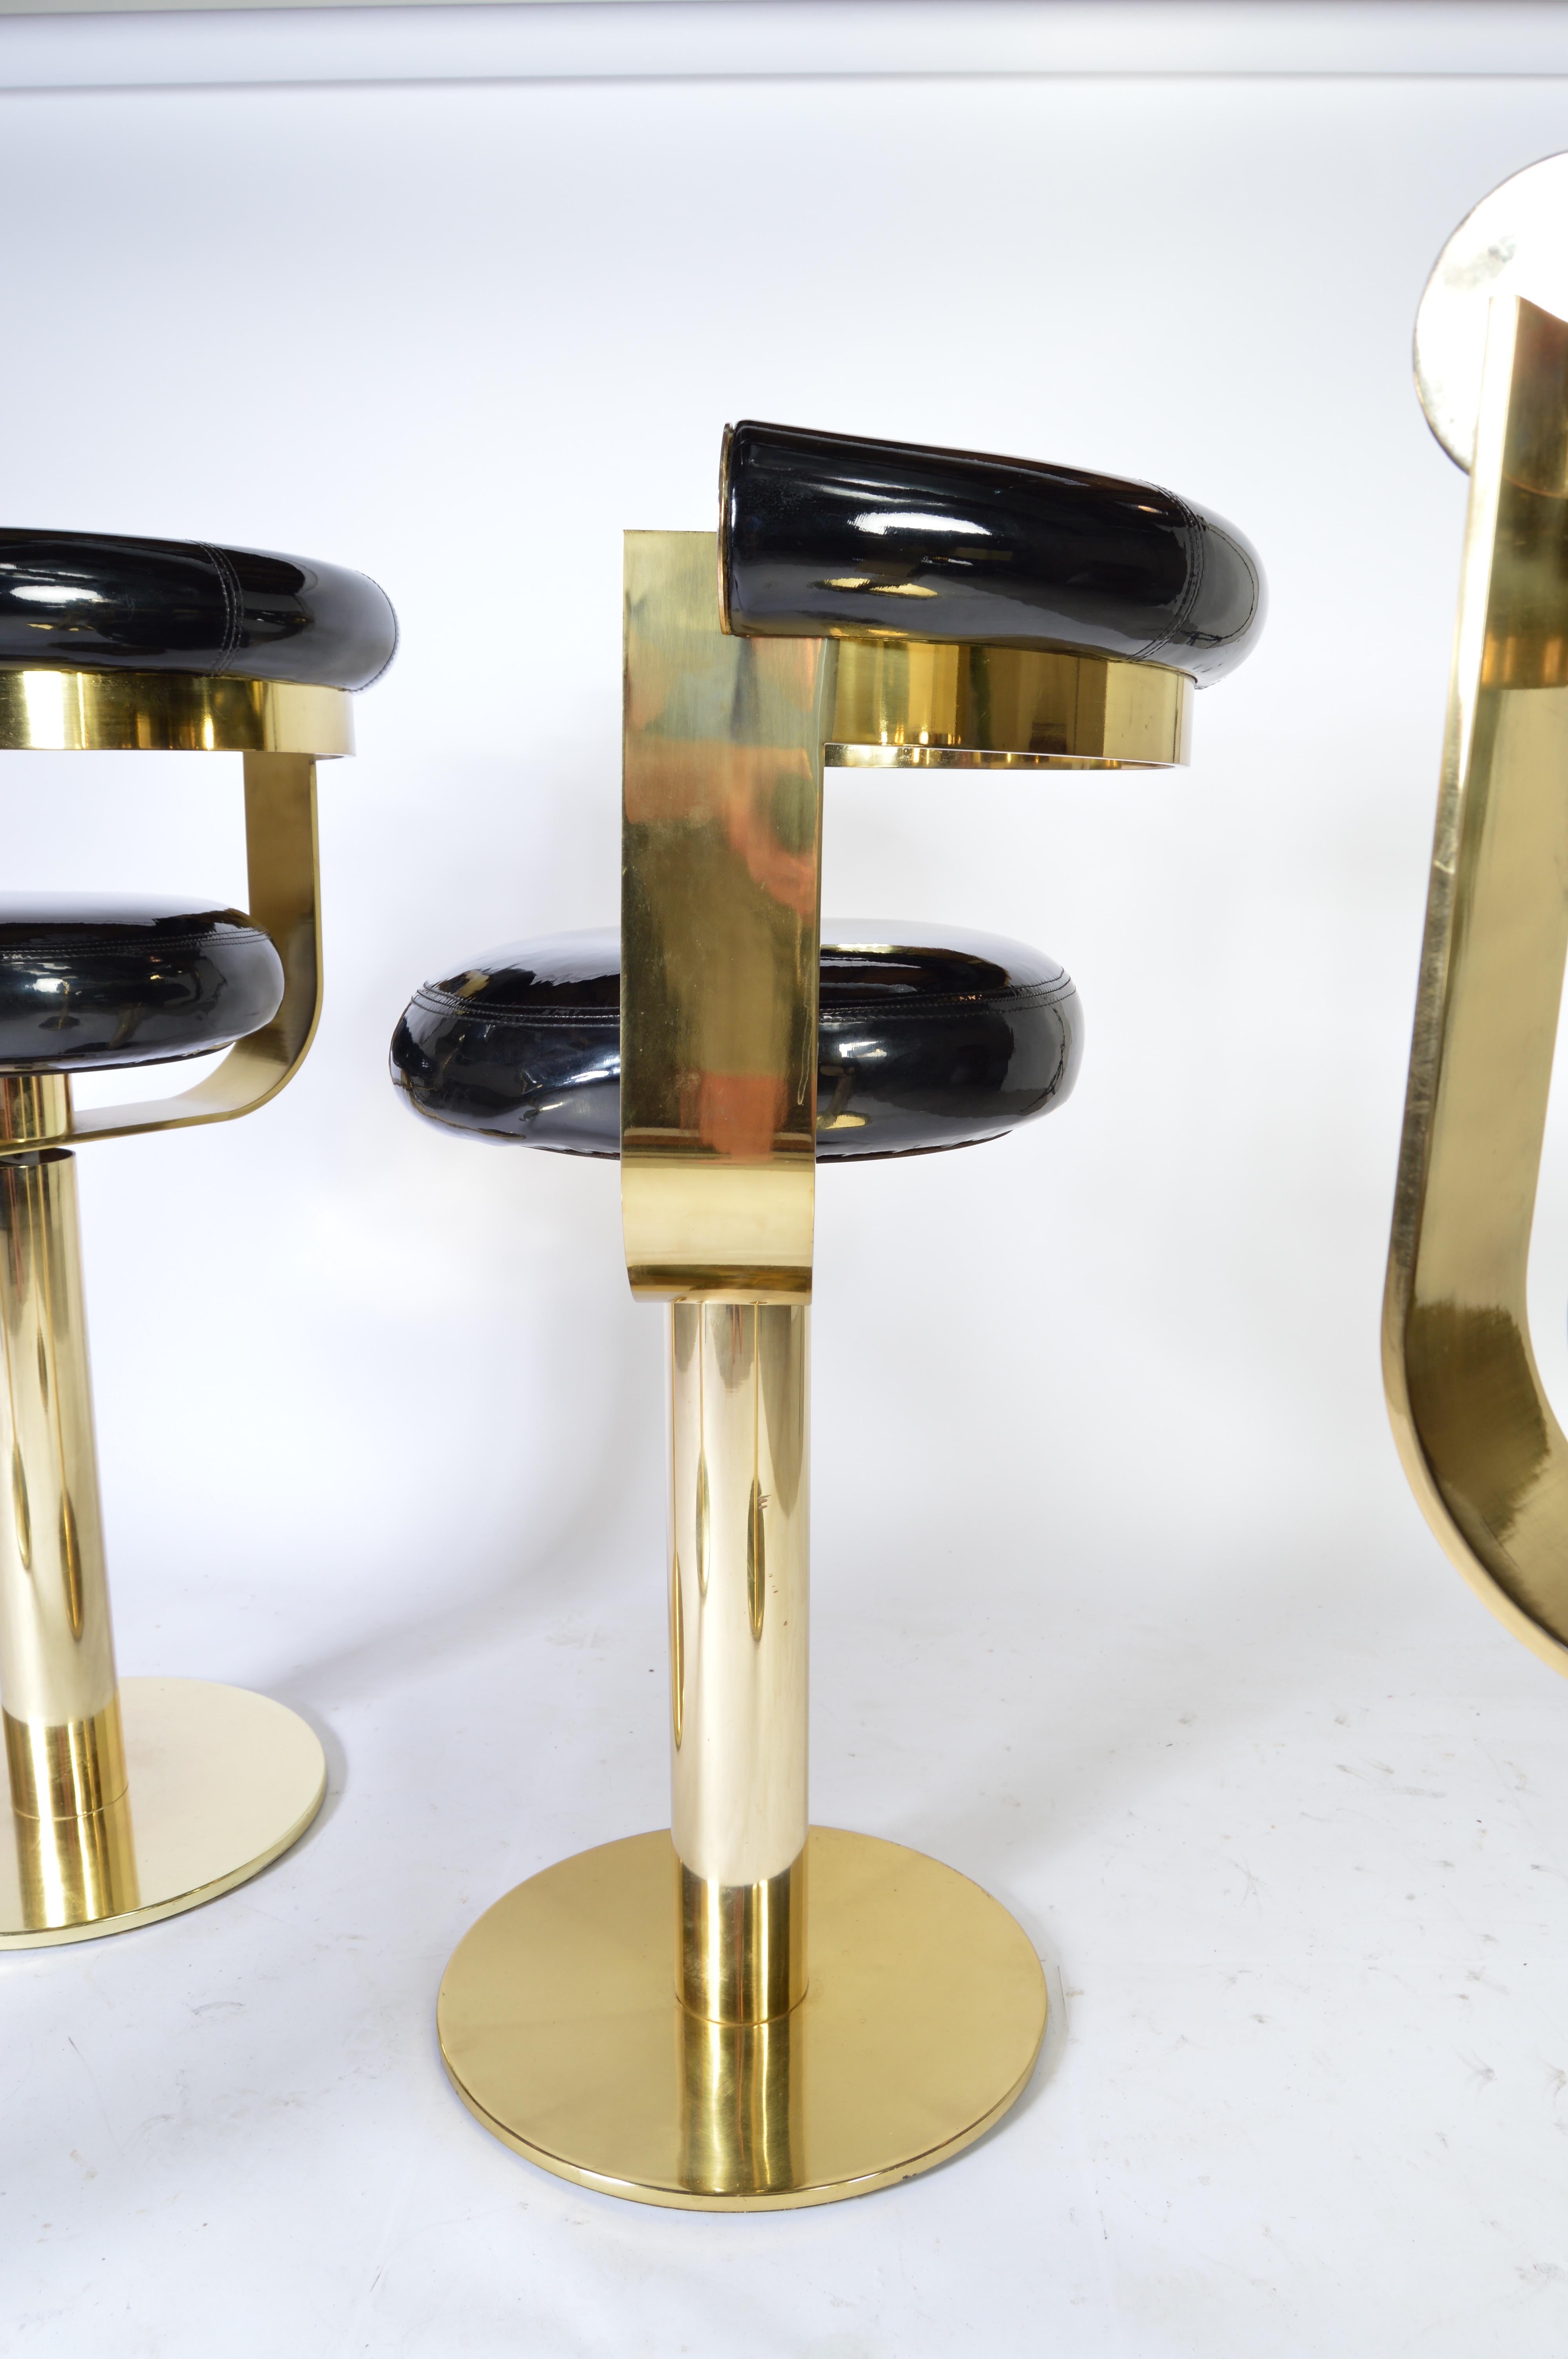 Custom Brass Counter Bar Stools in the Manner of Design For Leisure, circa 1970 (Ende des 20. Jahrhunderts)